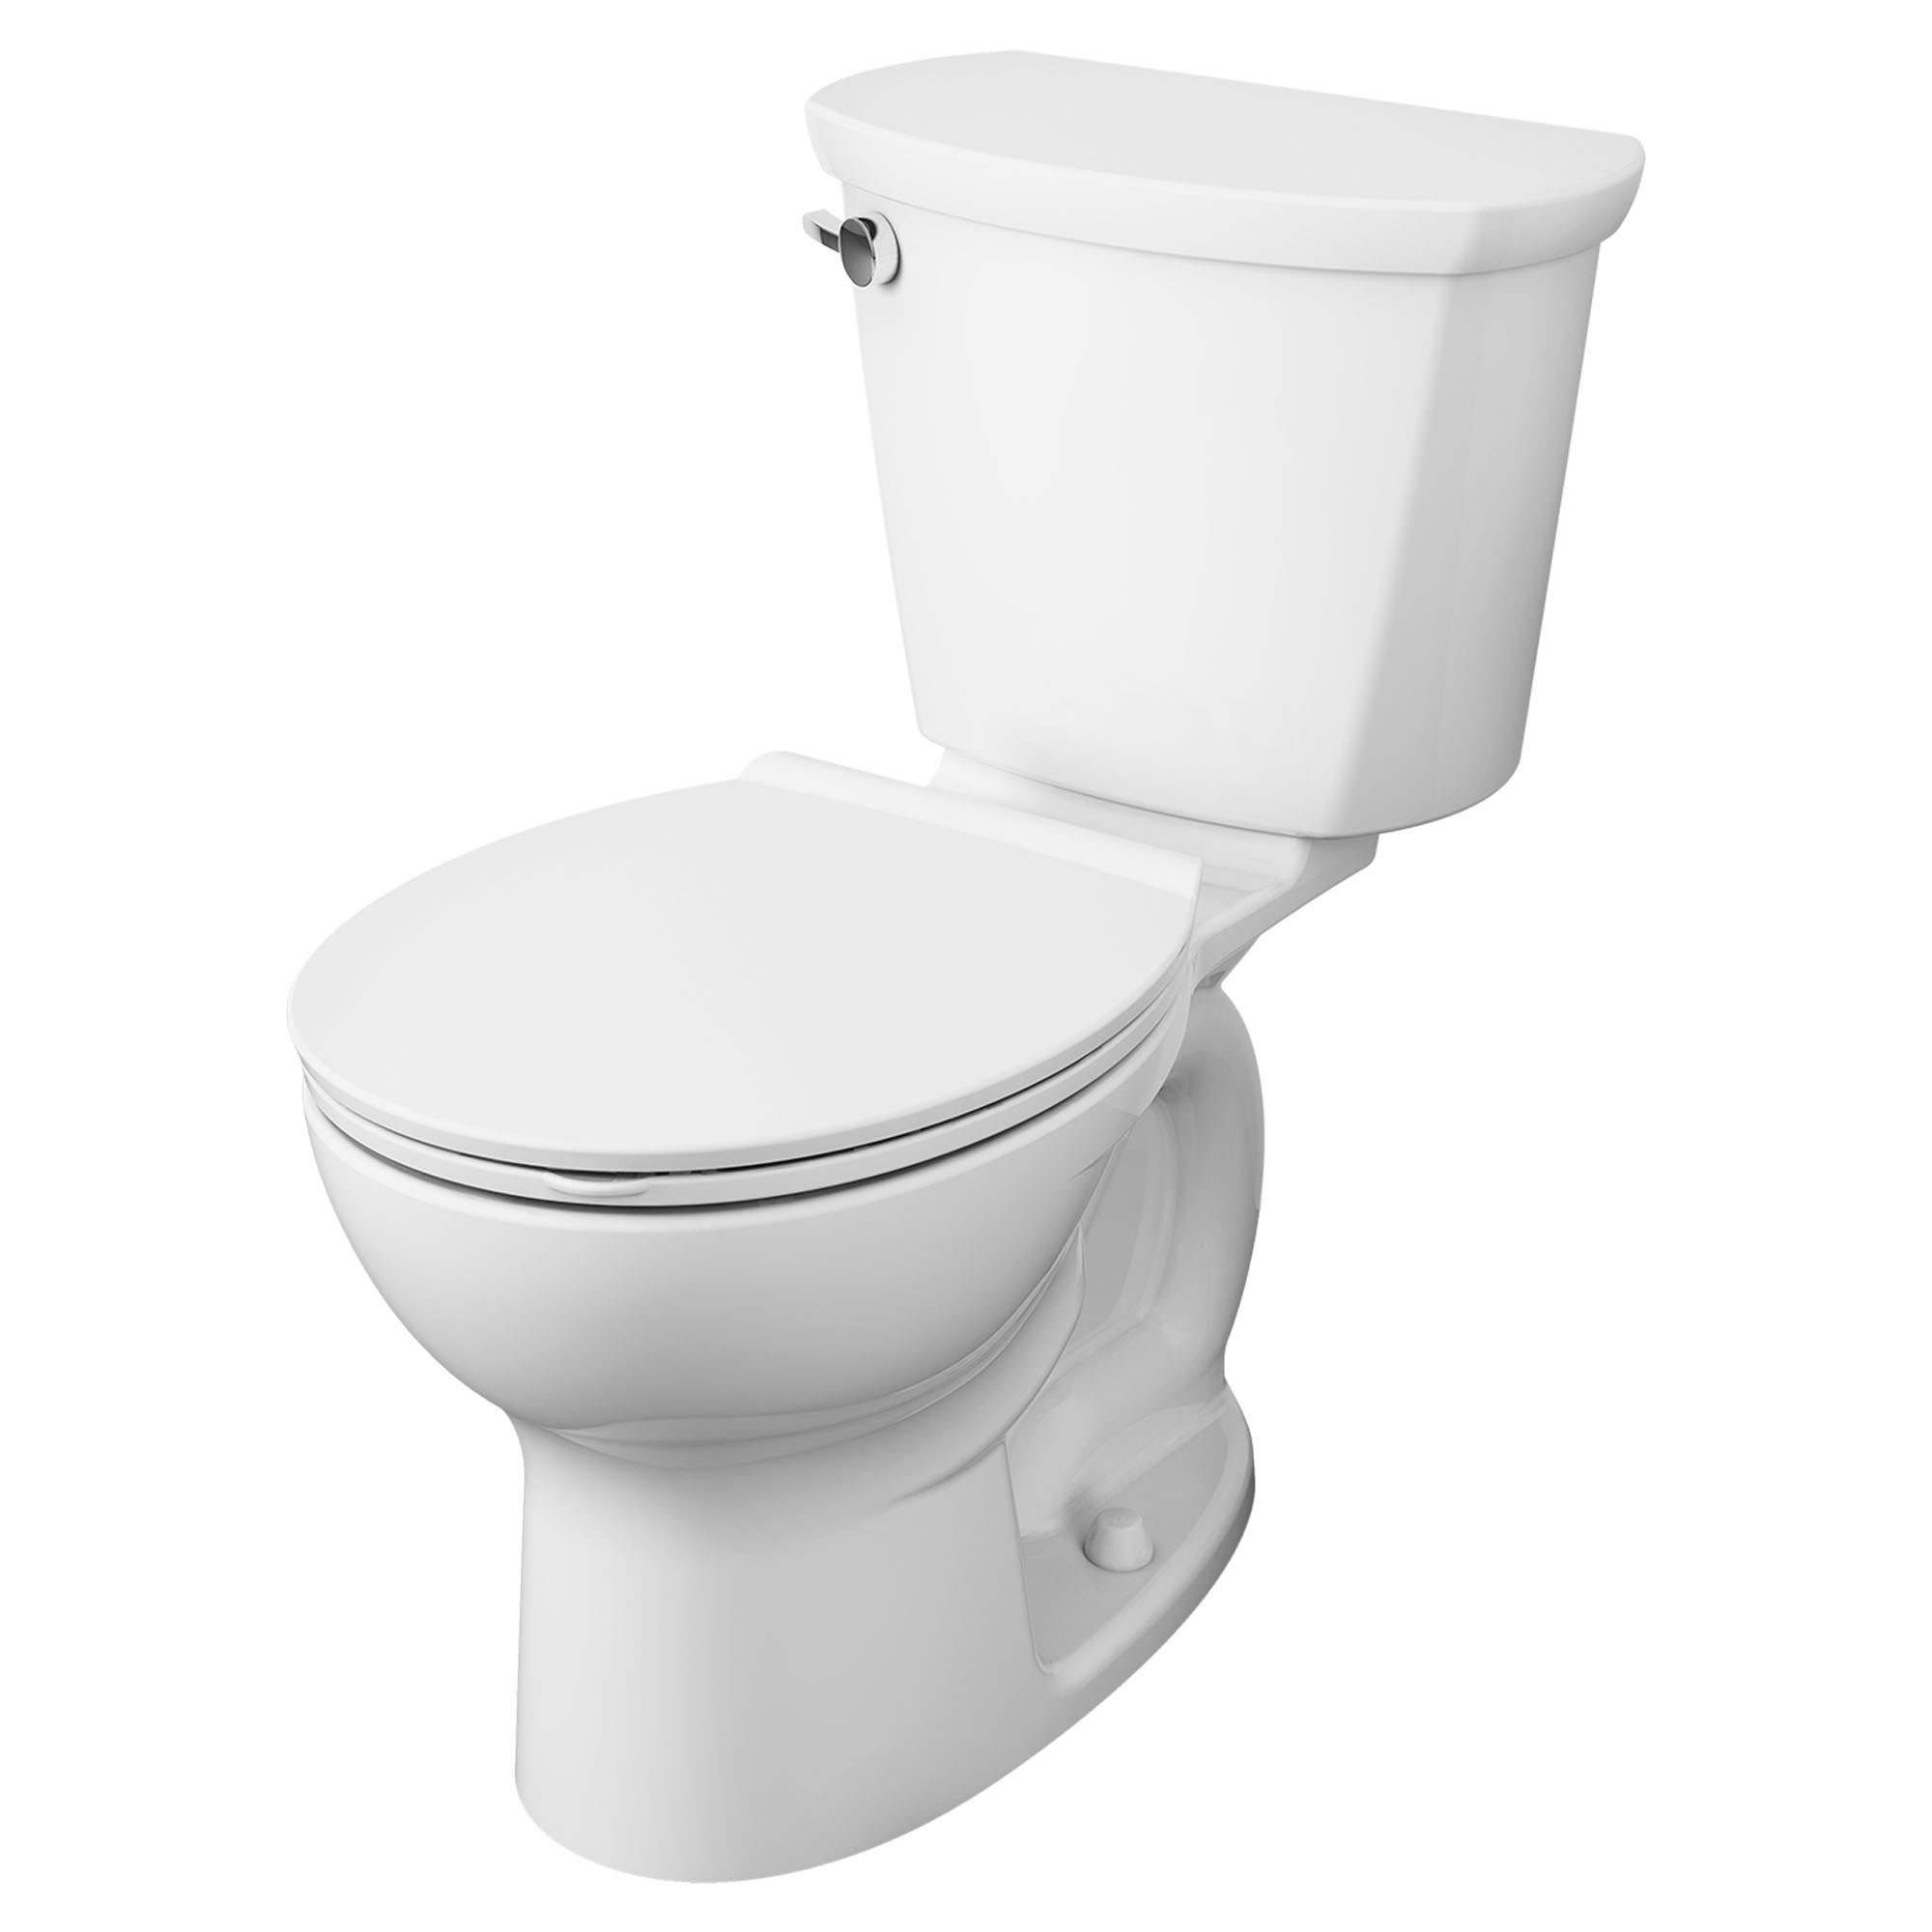 Cadet® PRO Two-Piece 1.28 gpf/4.8 Lpf Standard Height Round Front 10-Inch Rough Toilet Less Seat